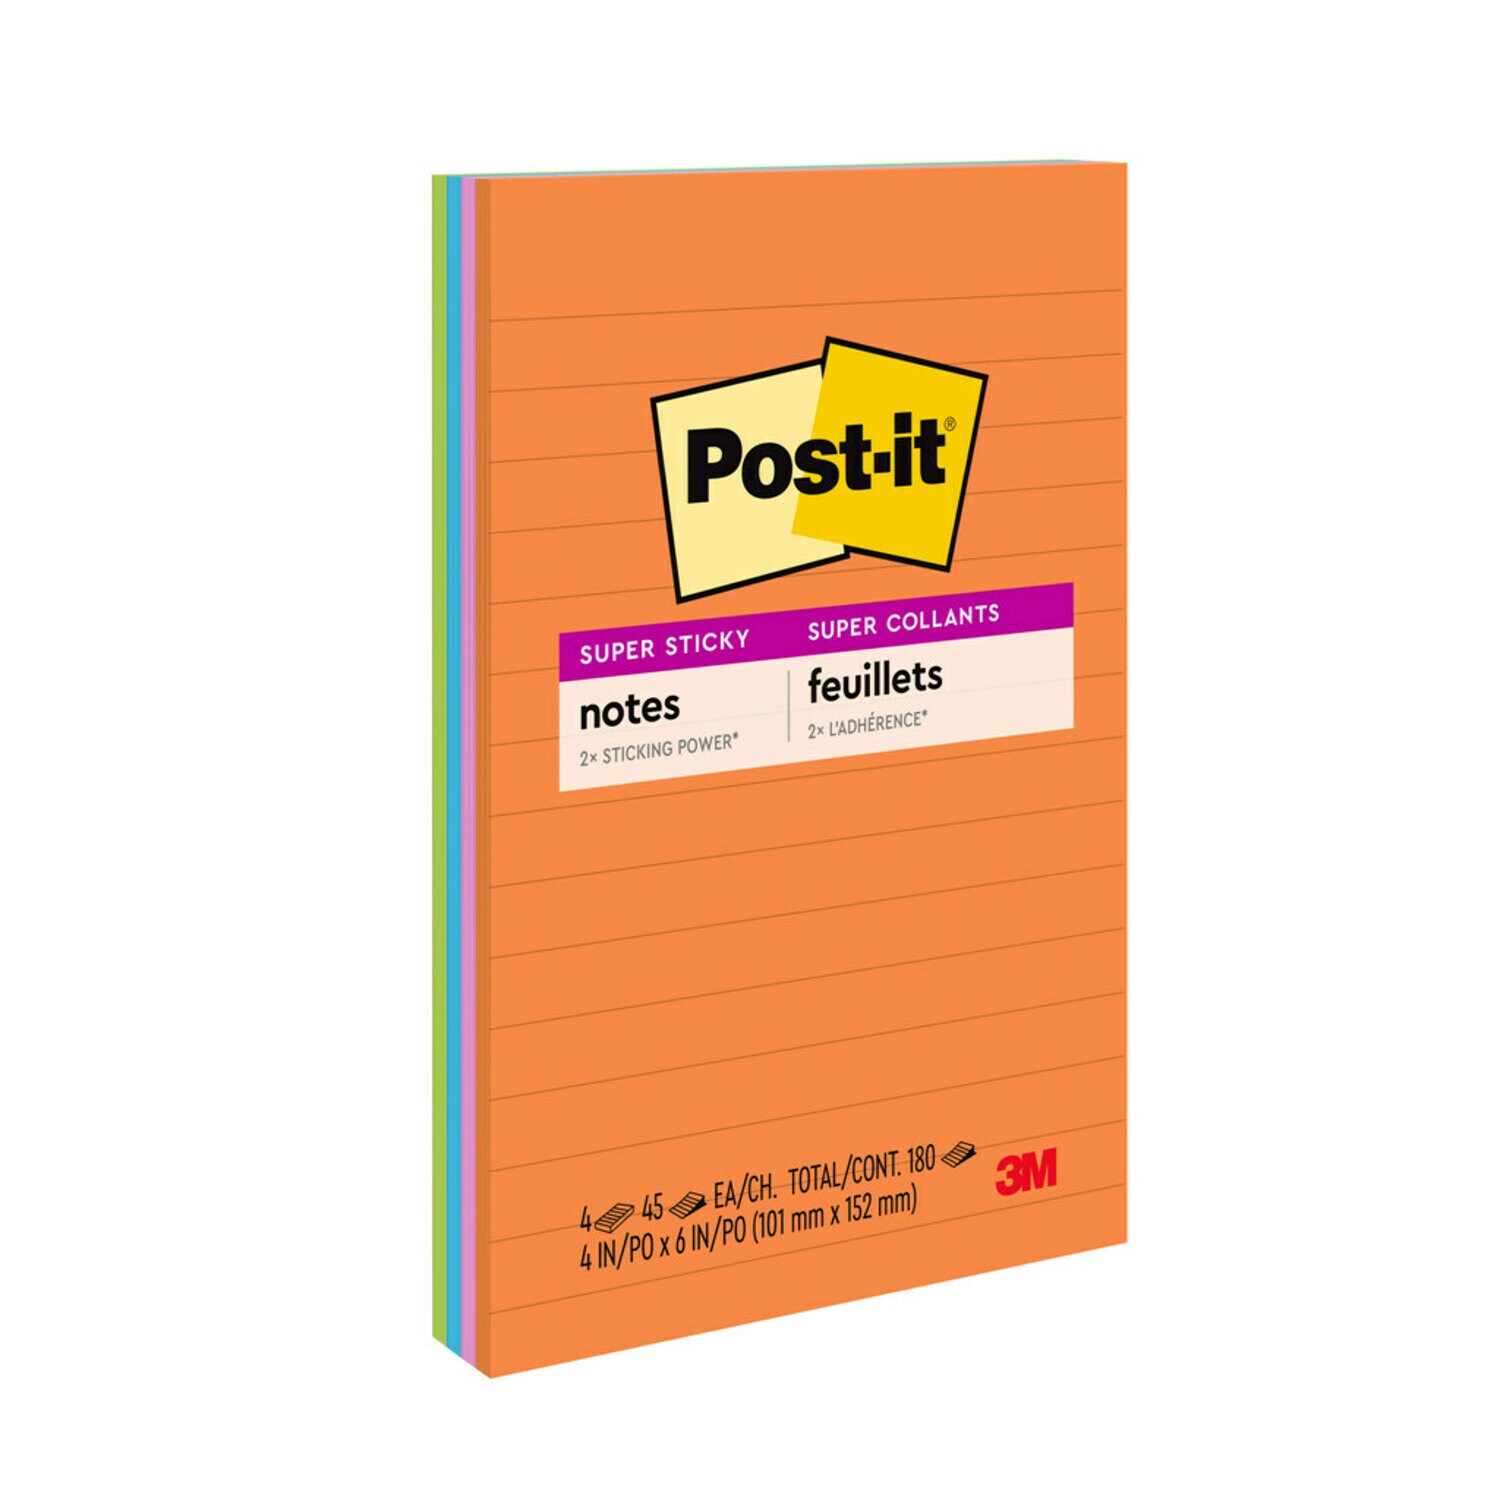 7100045378 - Post-it Super Sticky Notes 4621-SSAU, 4 in x 6 in (101 mm x 152 mm) Energy Boost, Lined, 4 Pads/Pack